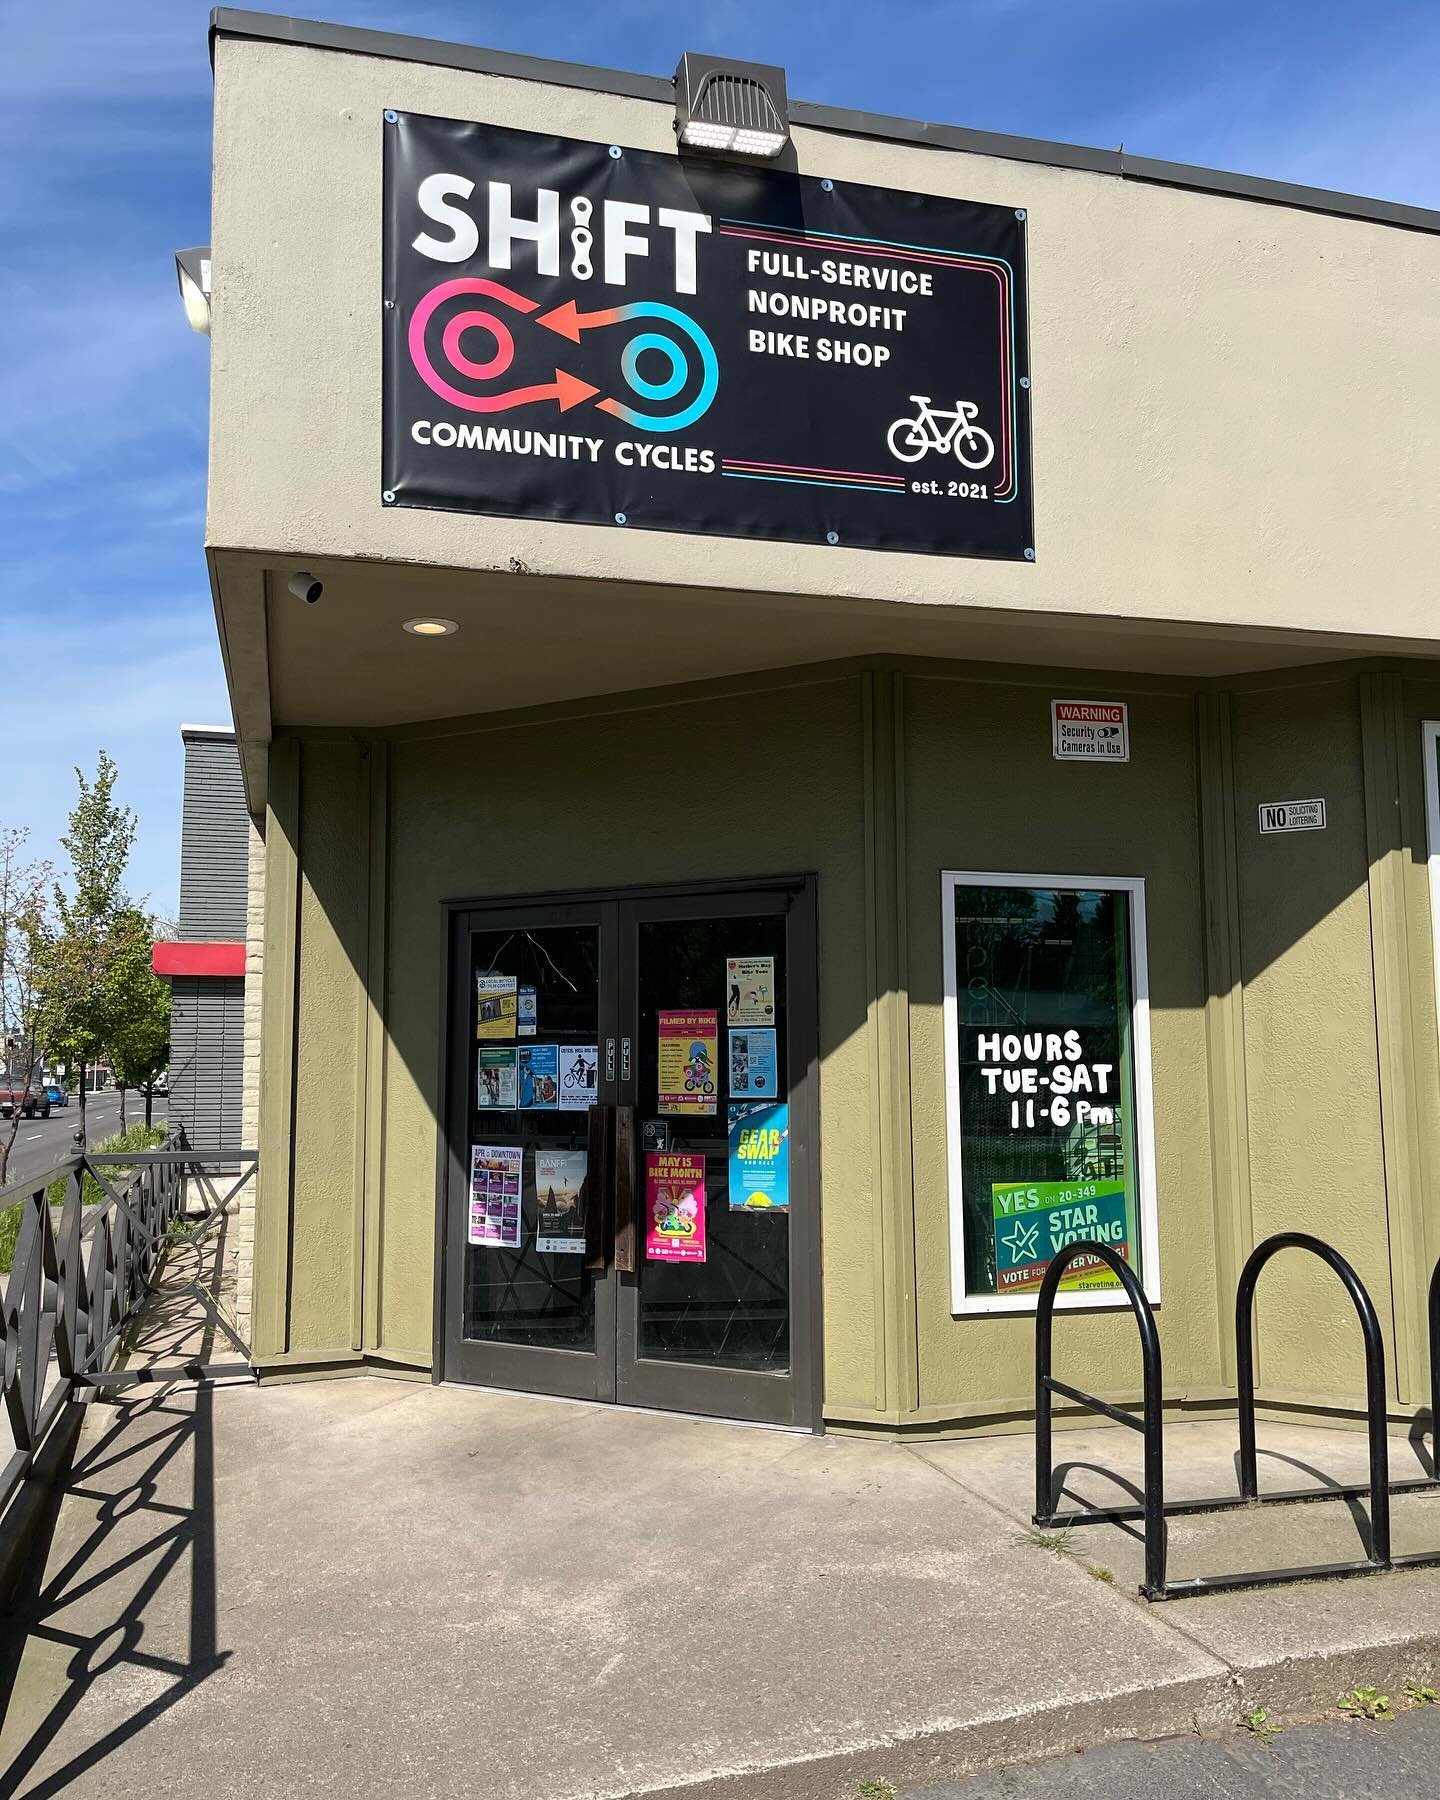 Happy Tuesday! Our Adult Basic Bike Maintenance series begins today. In order to prep for this workshop, we will be CLOSING our member and community workstands and used parts area at 4pm today (4/23) and Thursday (4/25).

Our service department and s